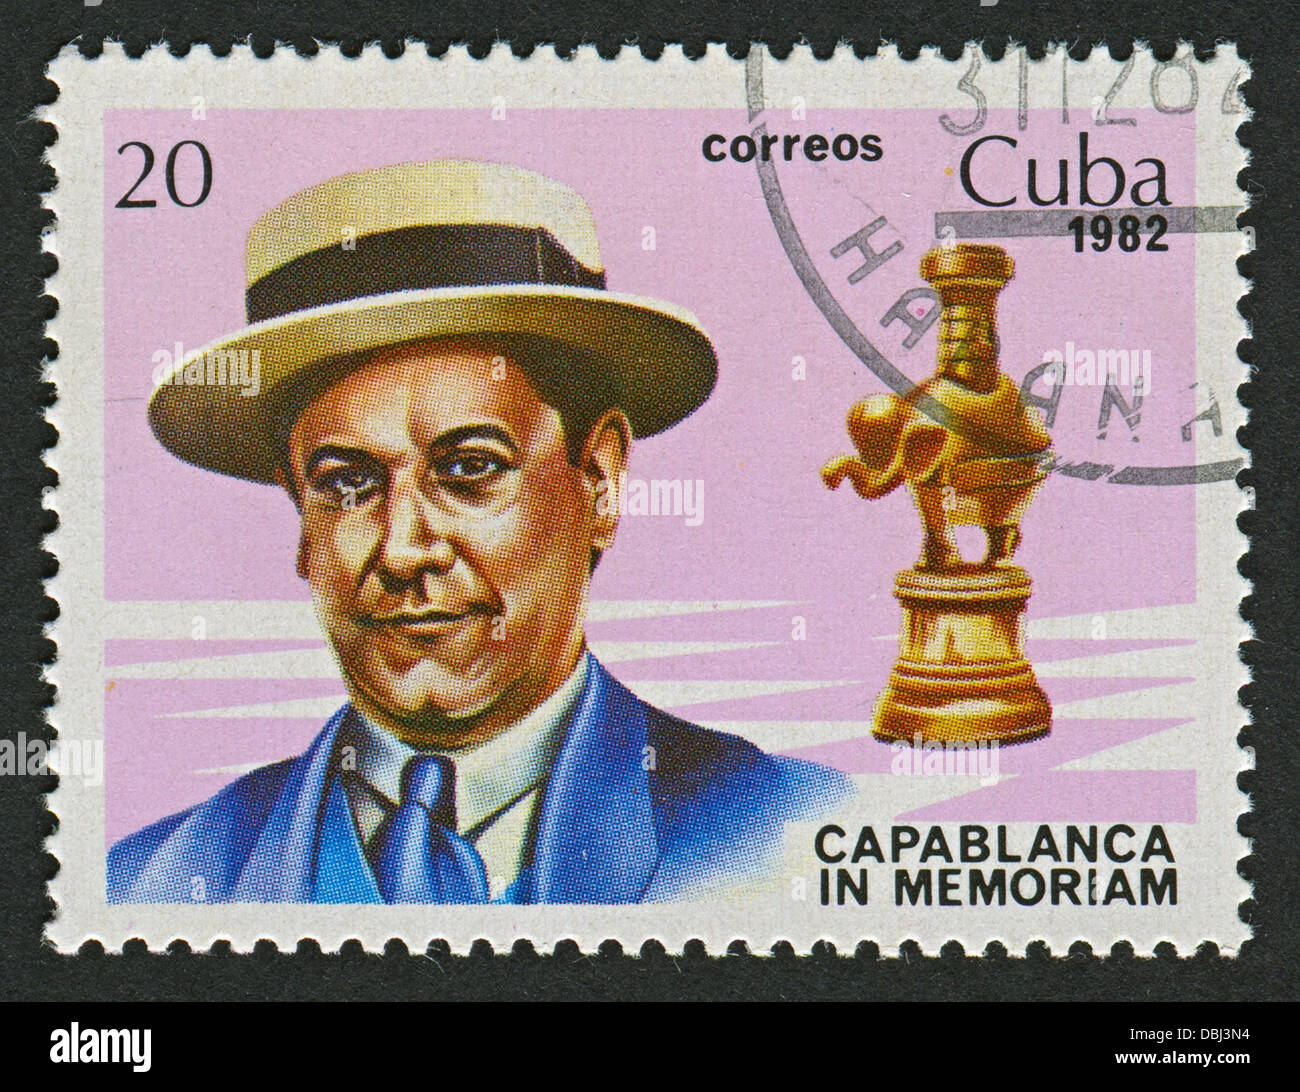 Stamp 2022, Sierra Leone 80th memorial anniversary of José Raúl Capablanca  s/s, 2022 - Collecting Stamps - PostBeeld - Online Stamp Shop - Collecting